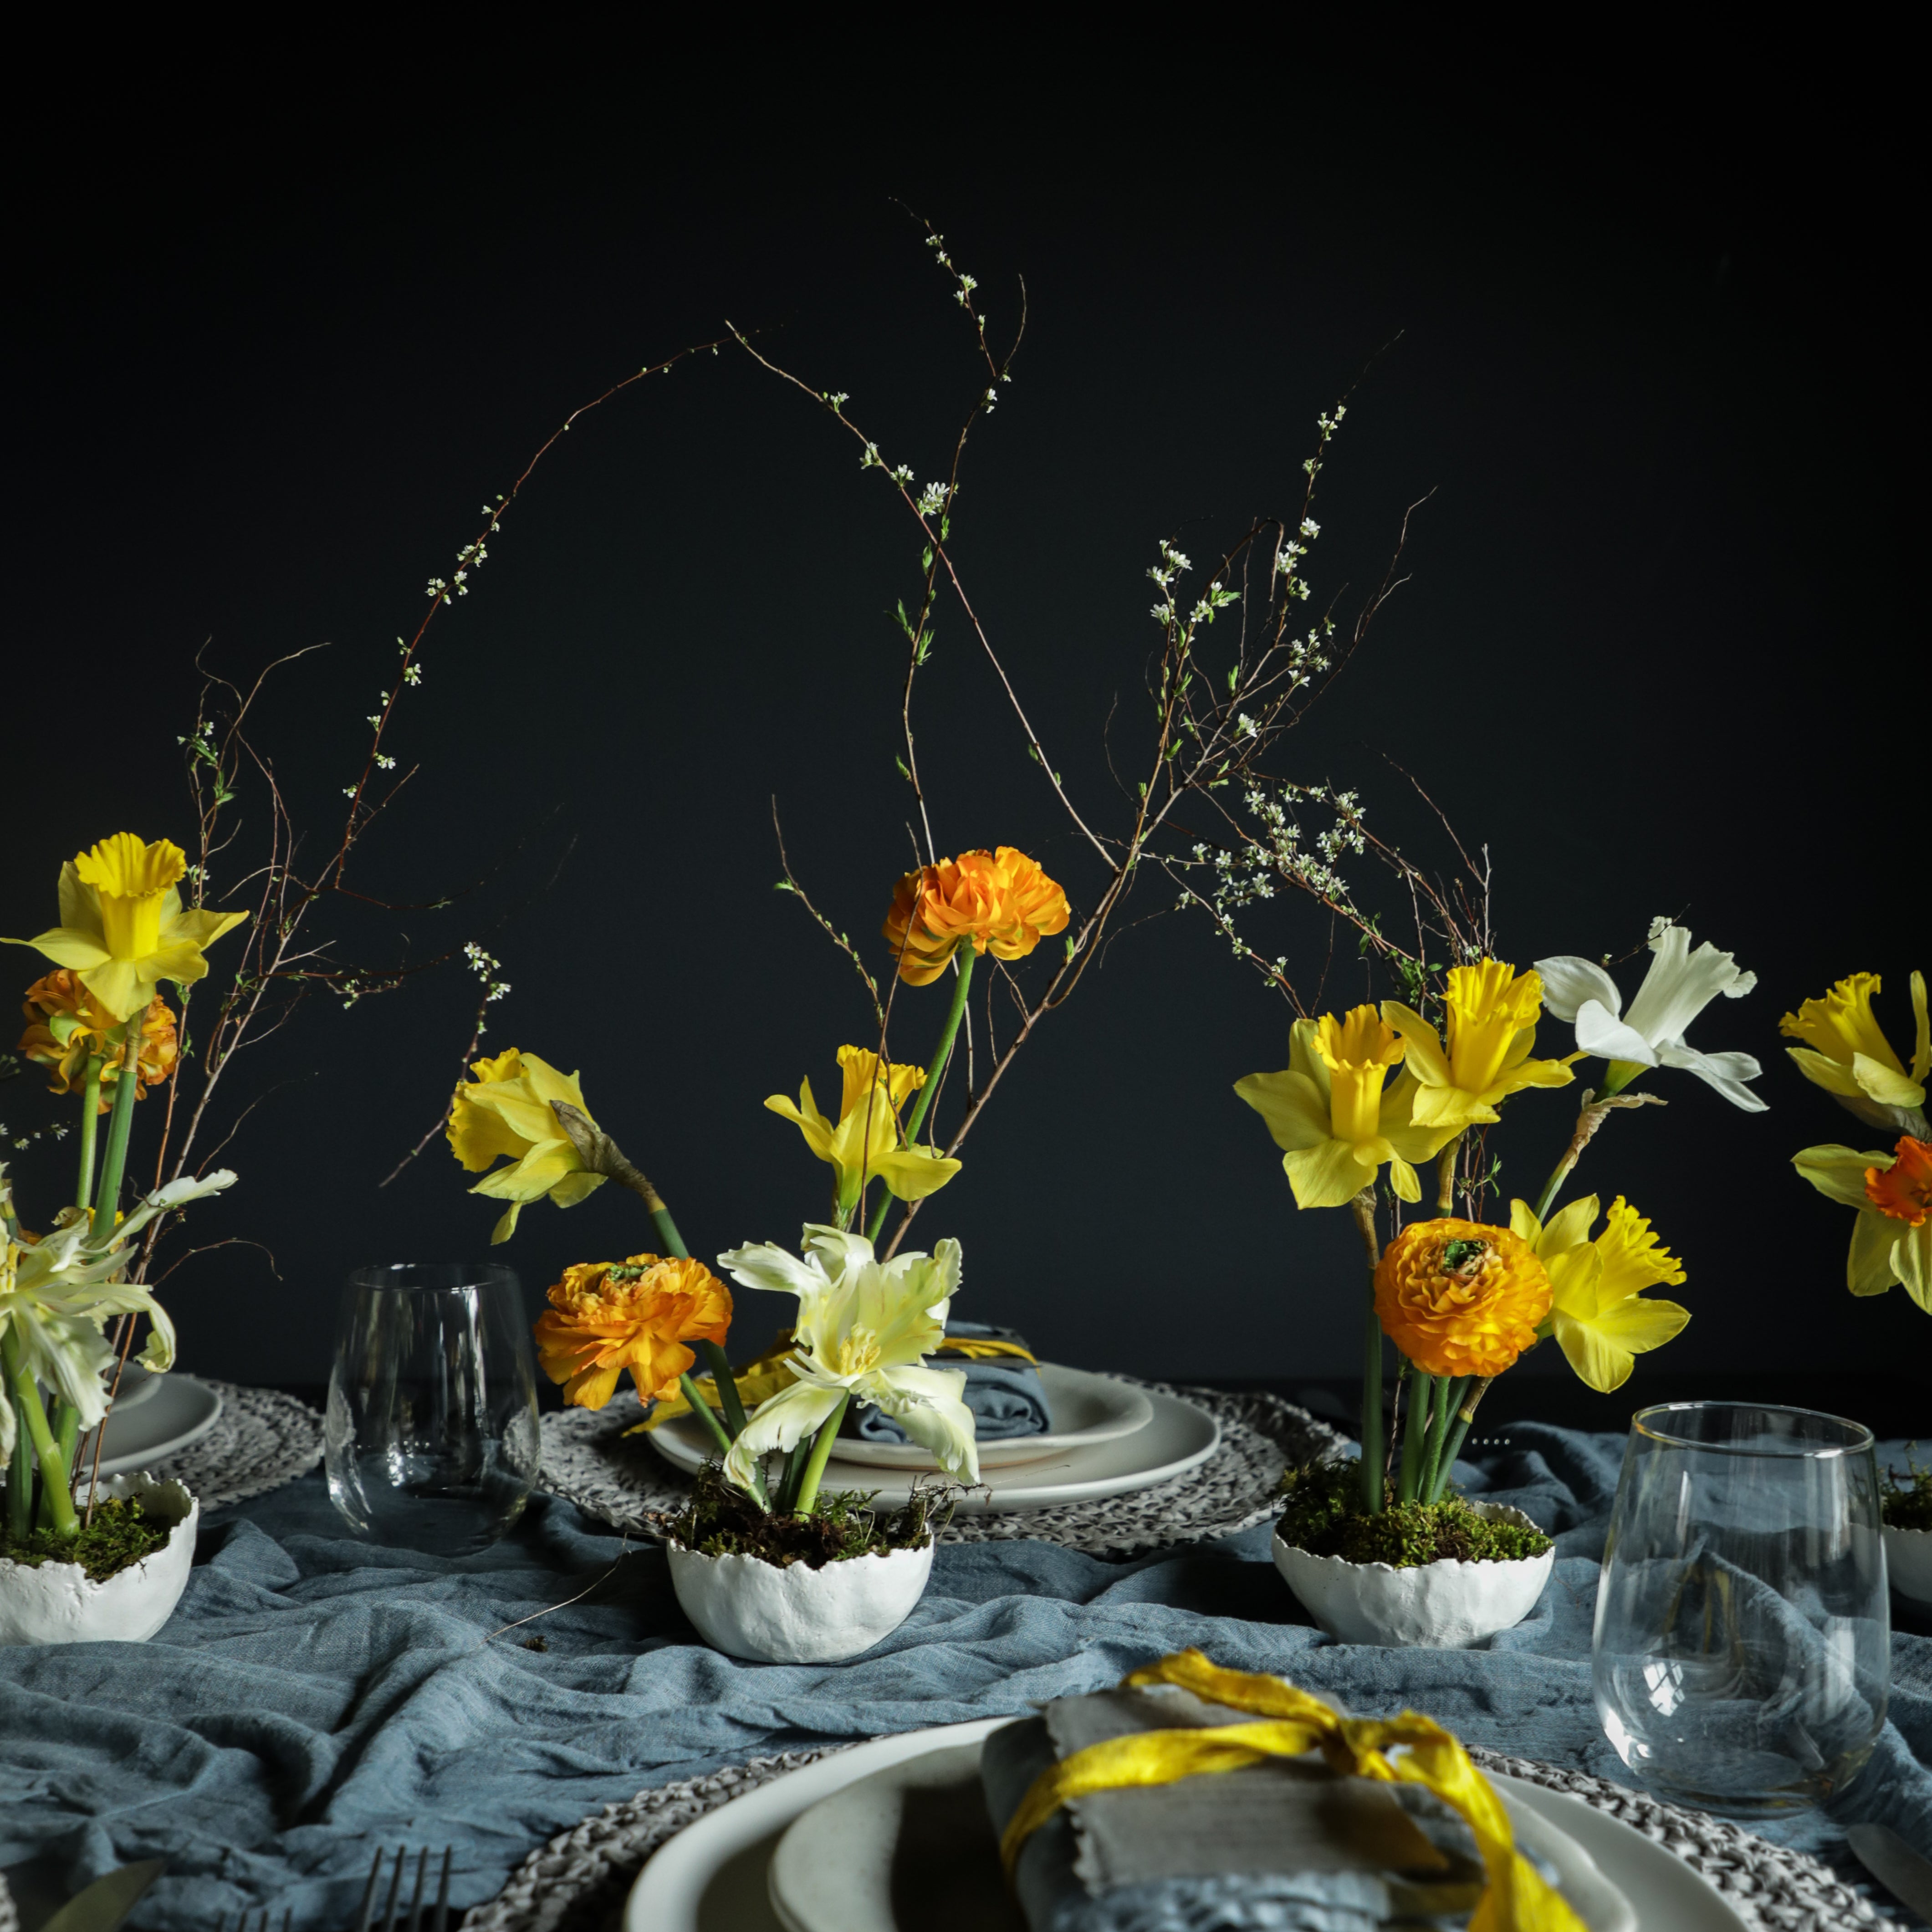 Natural Tables by shellie pomeroy. tablescape design by silk and willow